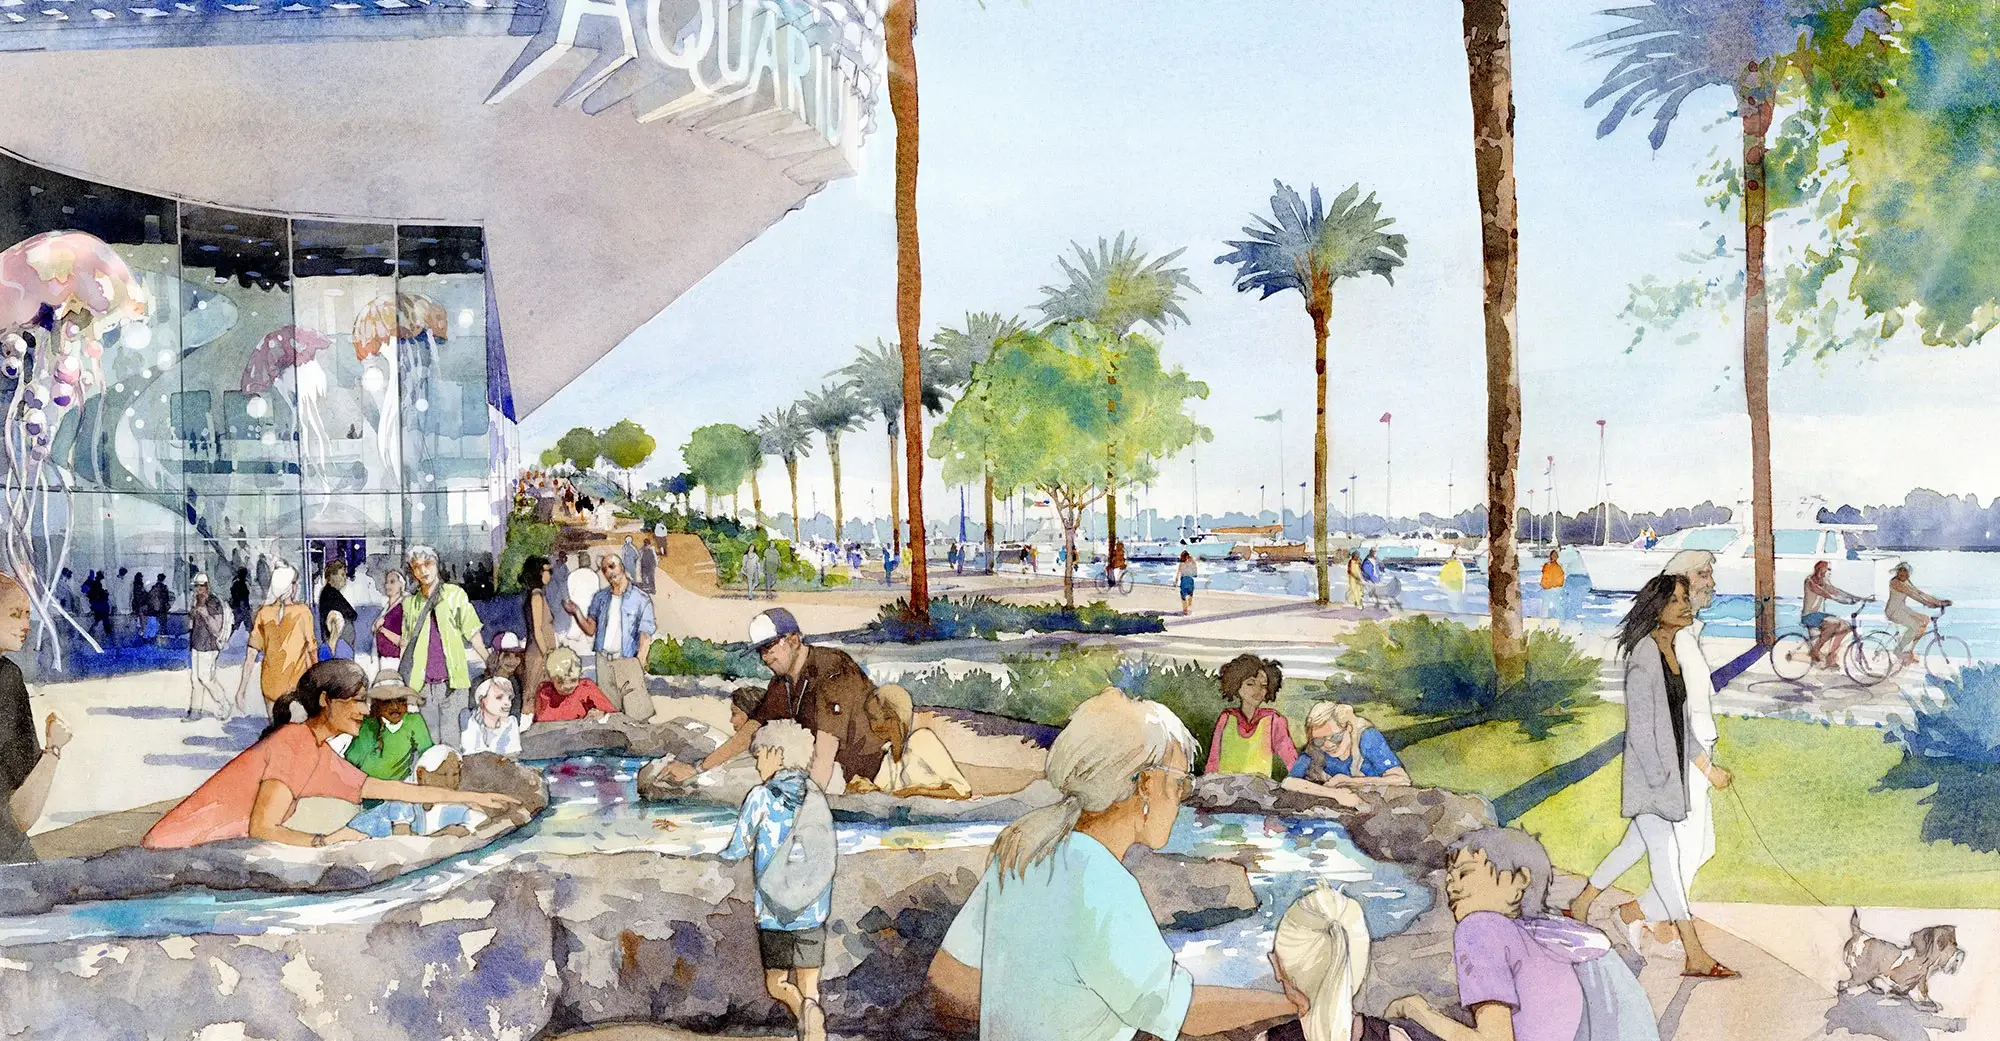 Artist rendering of people gathering and walking by a water feature.